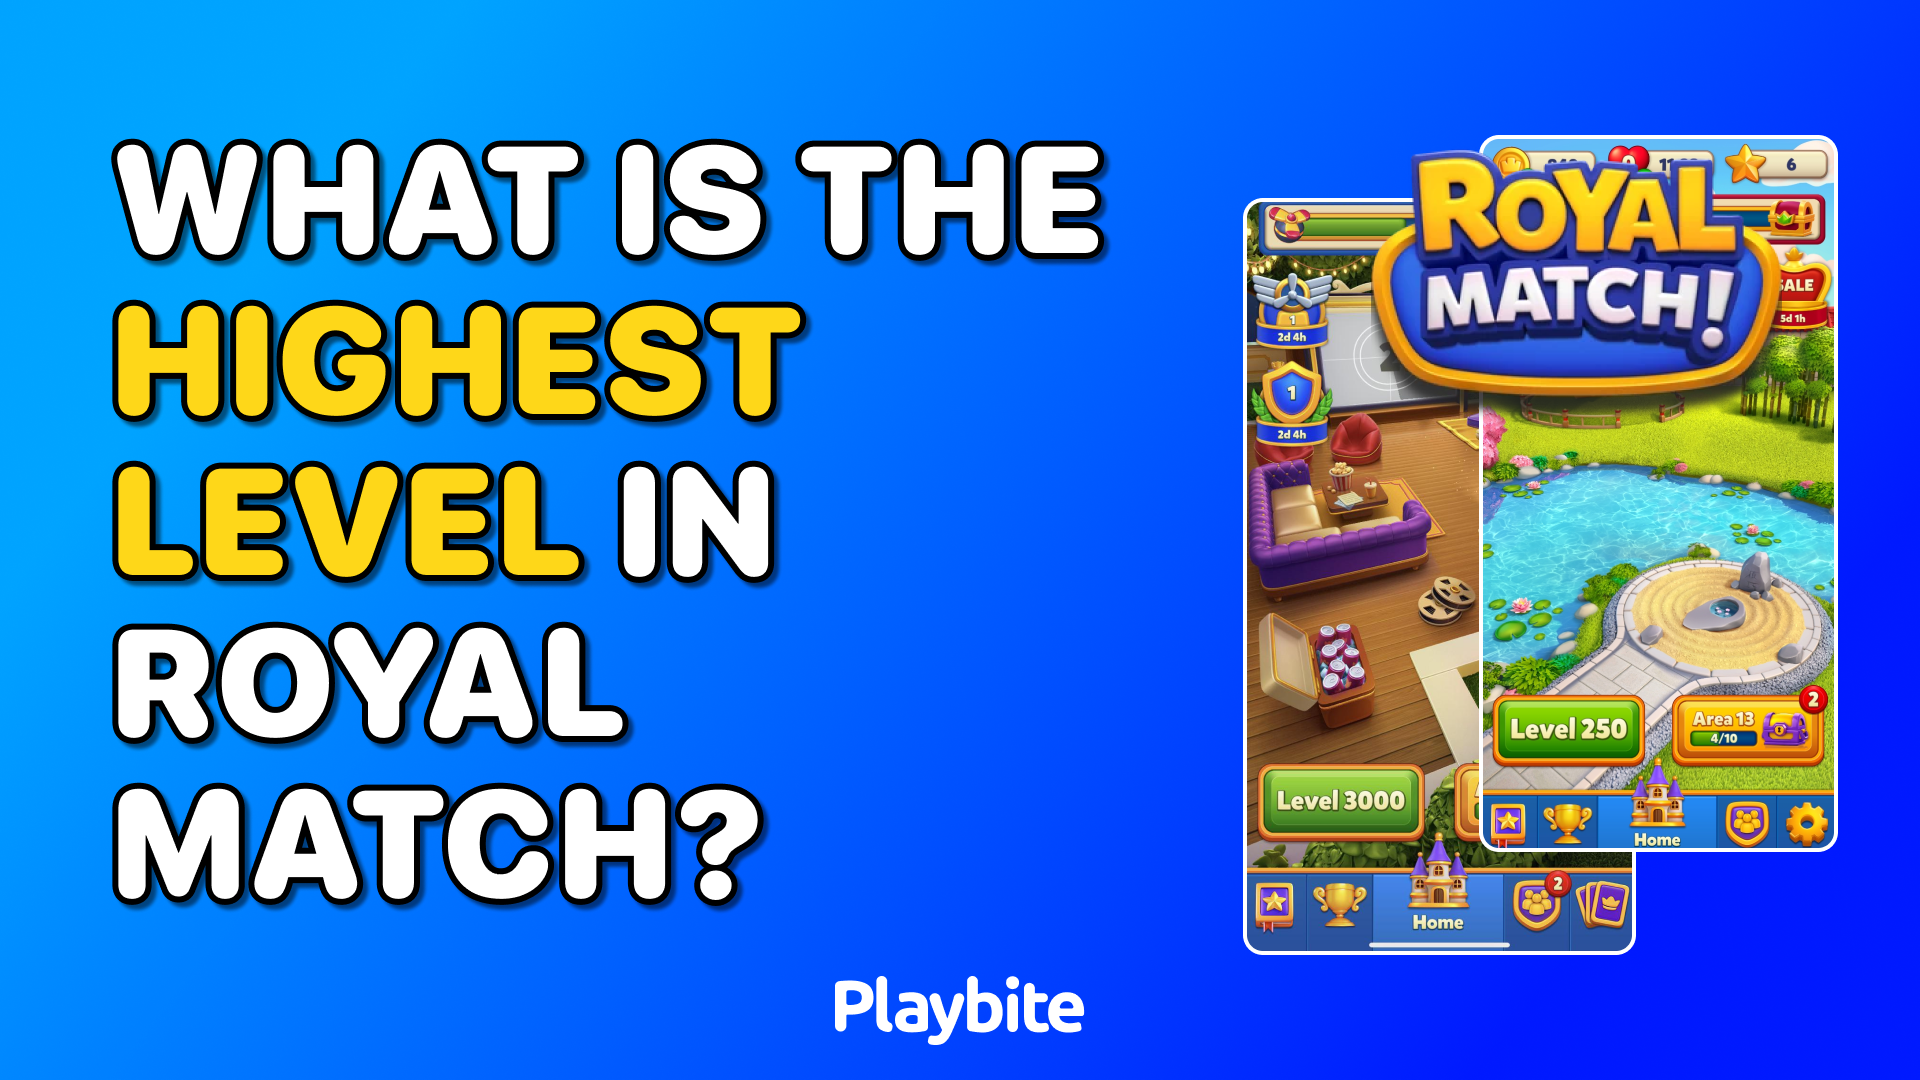 What Is the Highest Level in Royal Match?